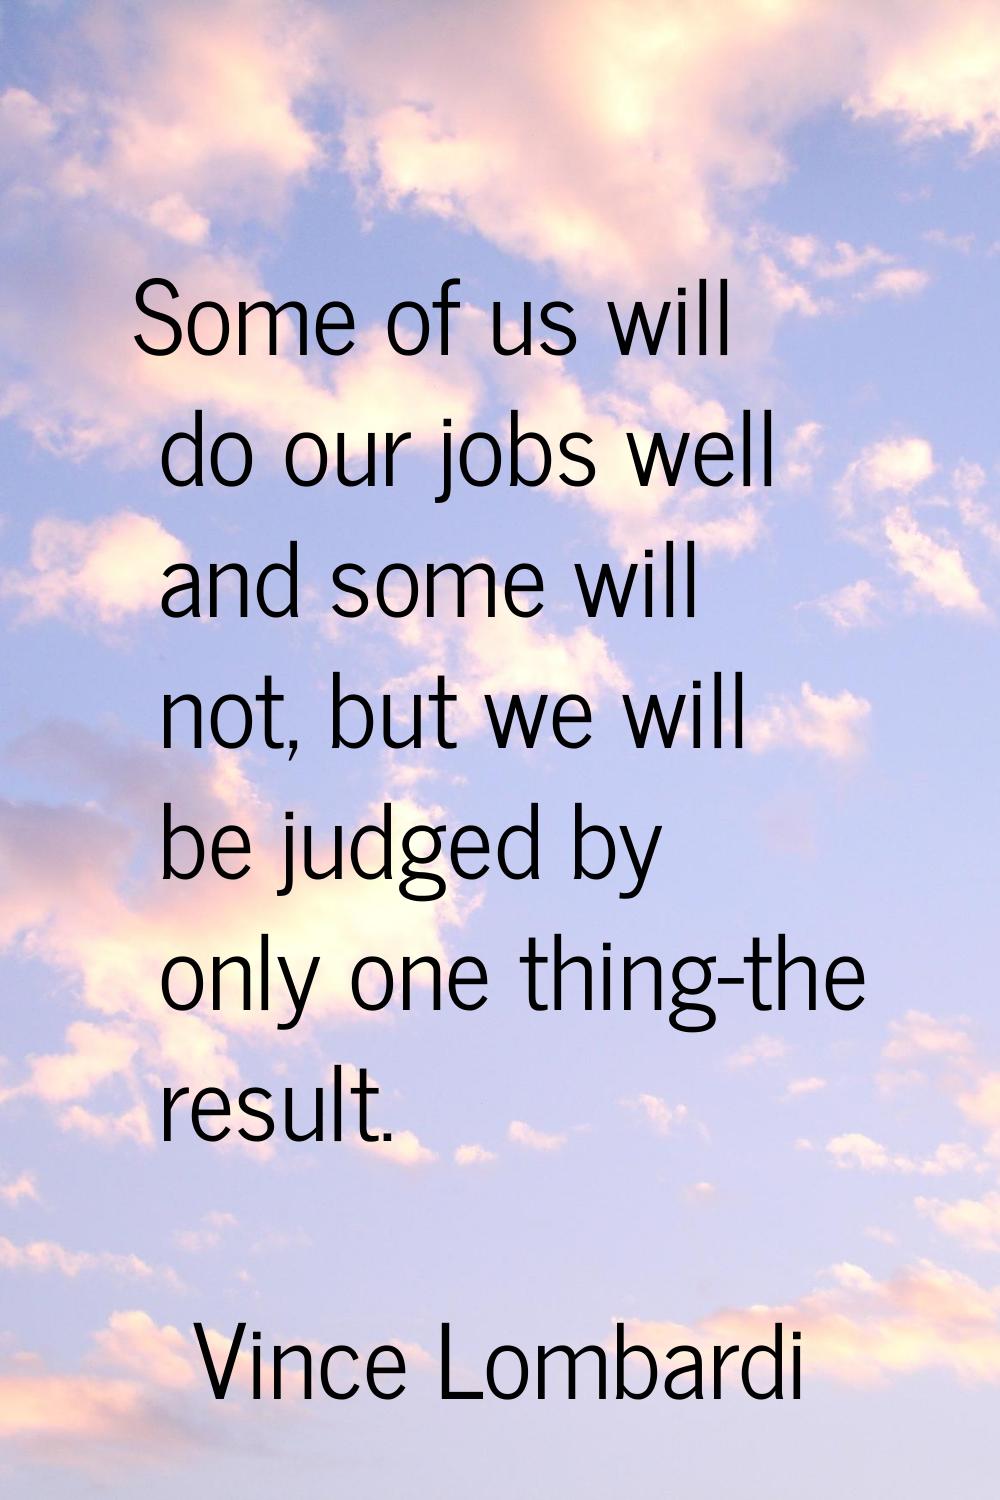 Some of us will do our jobs well and some will not, but we will be judged by only one thing-the res